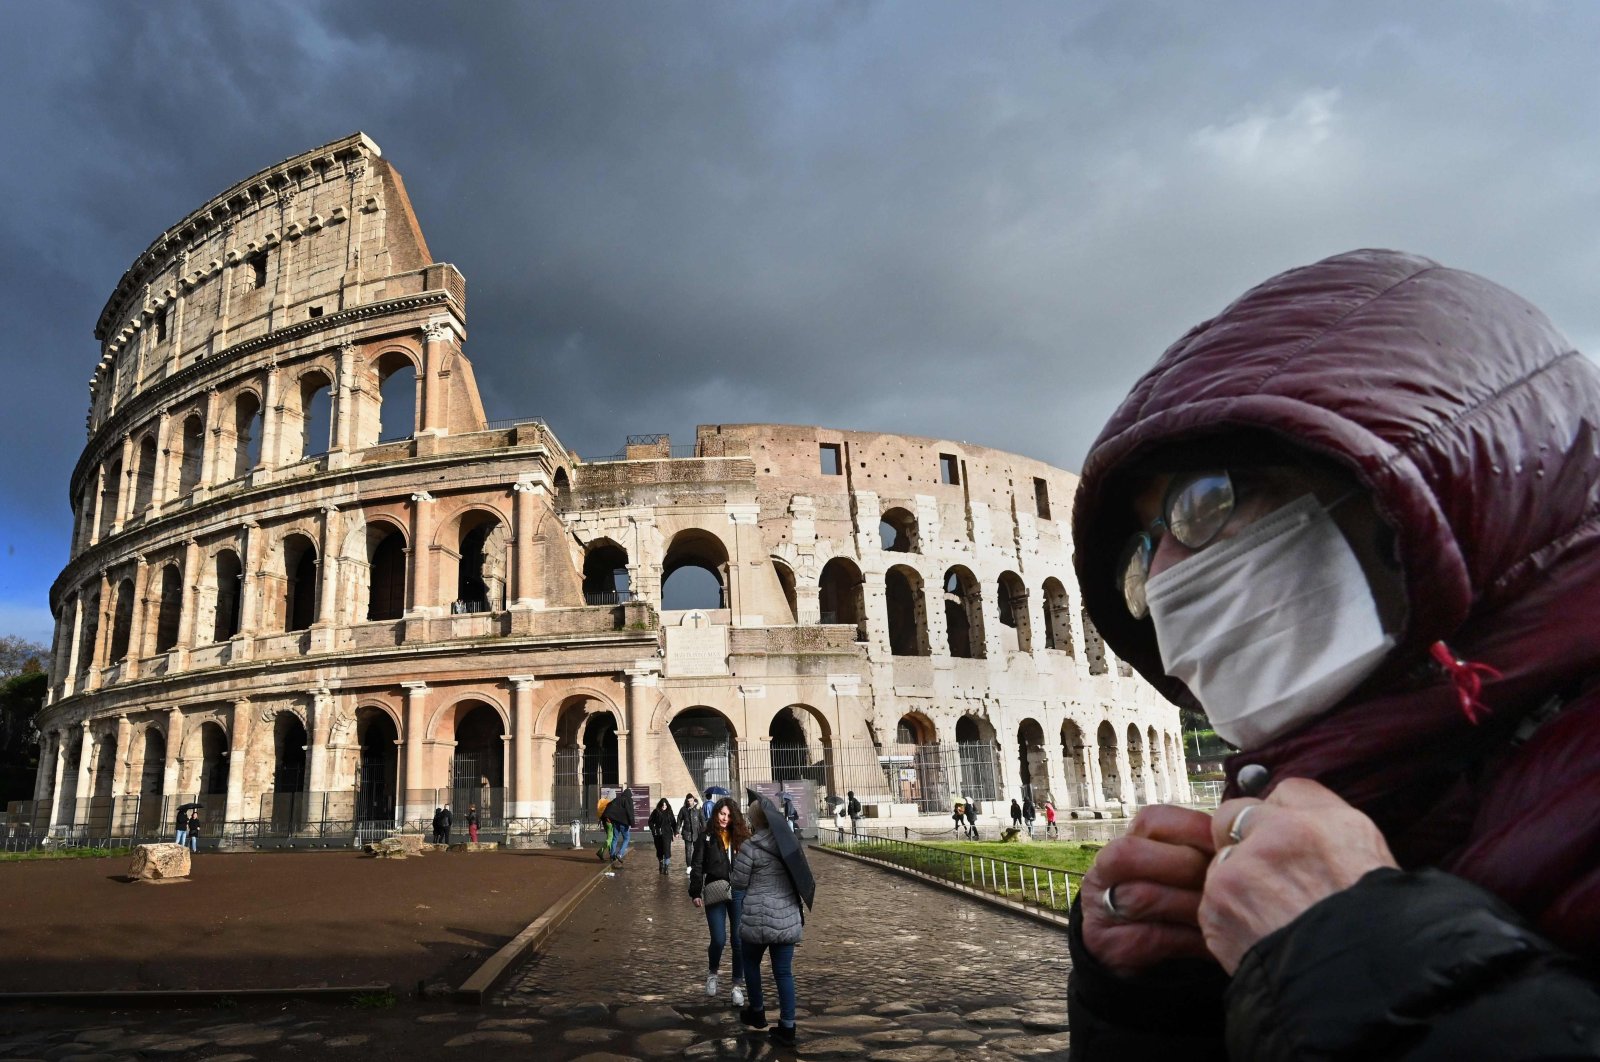 A man wearing a protective mask passes by the Coliseum in Rome amid fears of the COVID-19 pandemic, Italy, March 7, 2020. (AFP Photo)